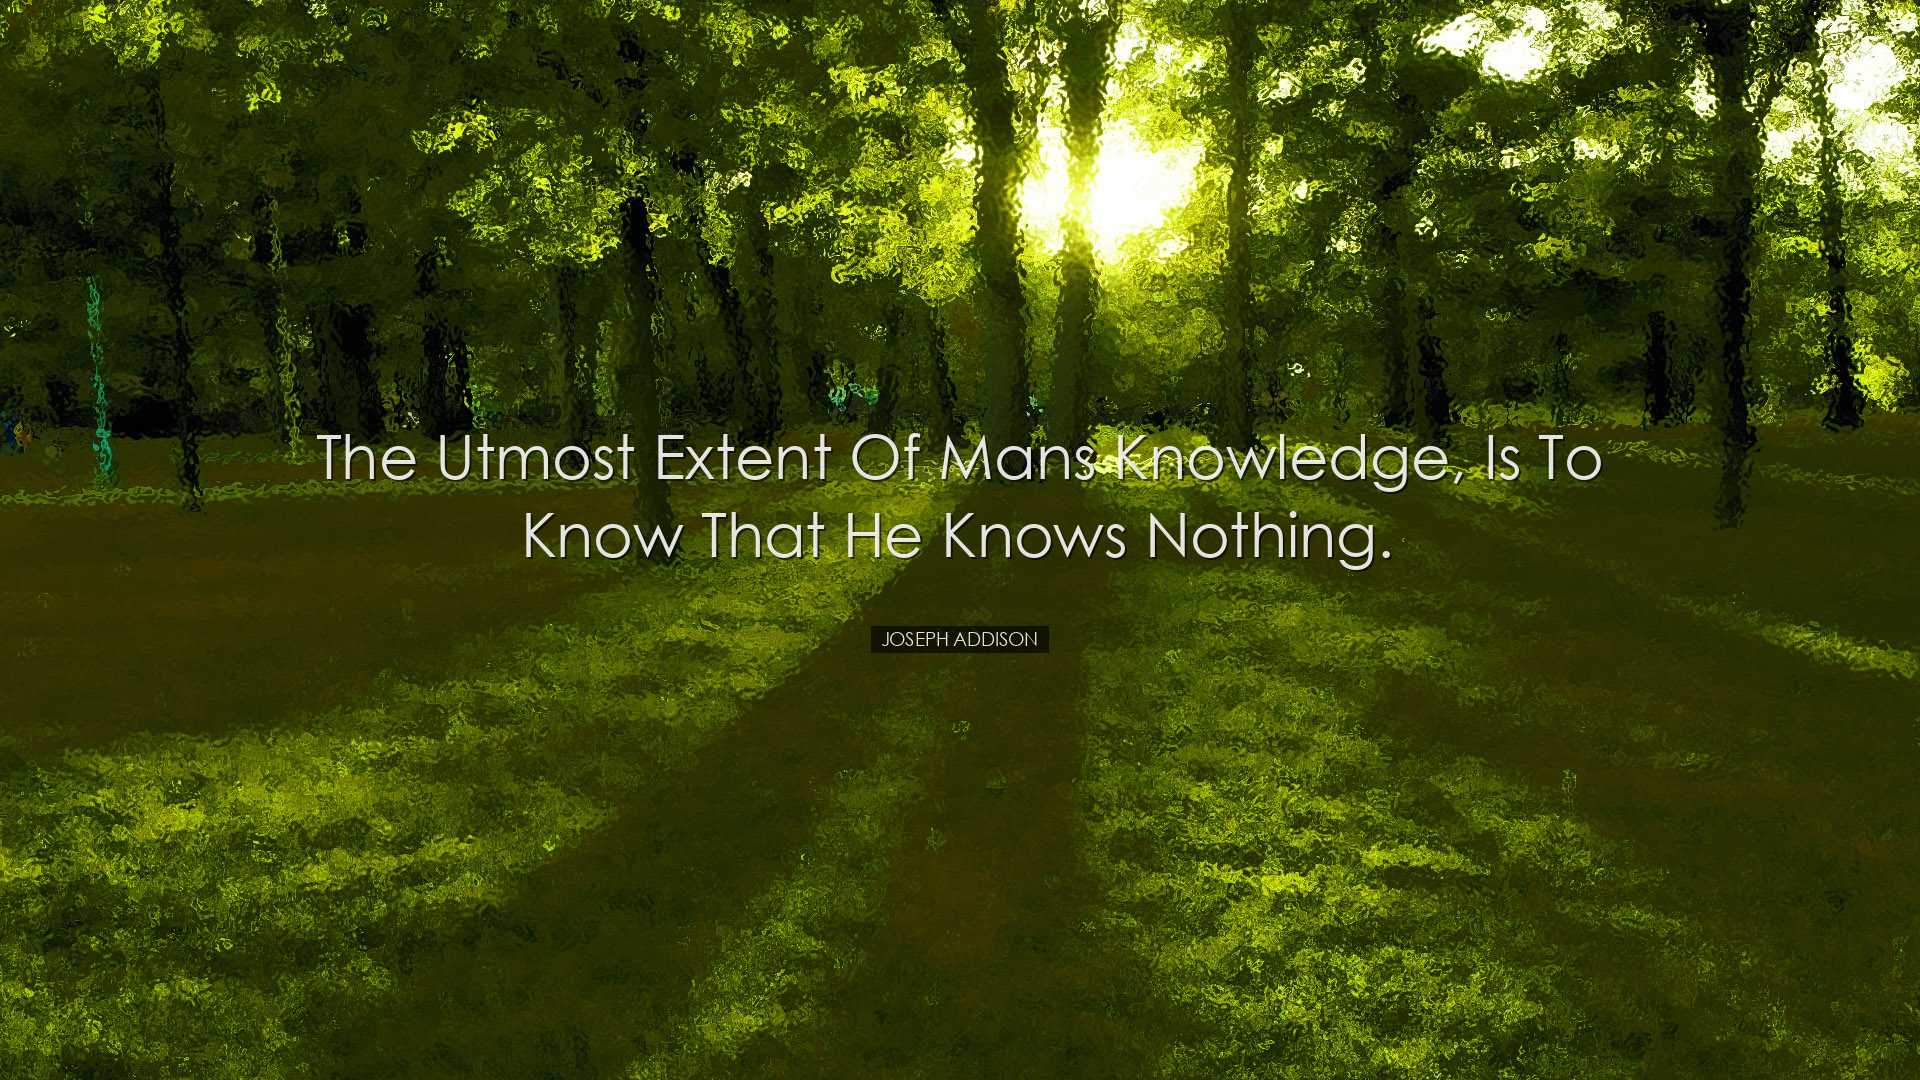 The utmost extent of mans knowledge, is to know that he knows noth